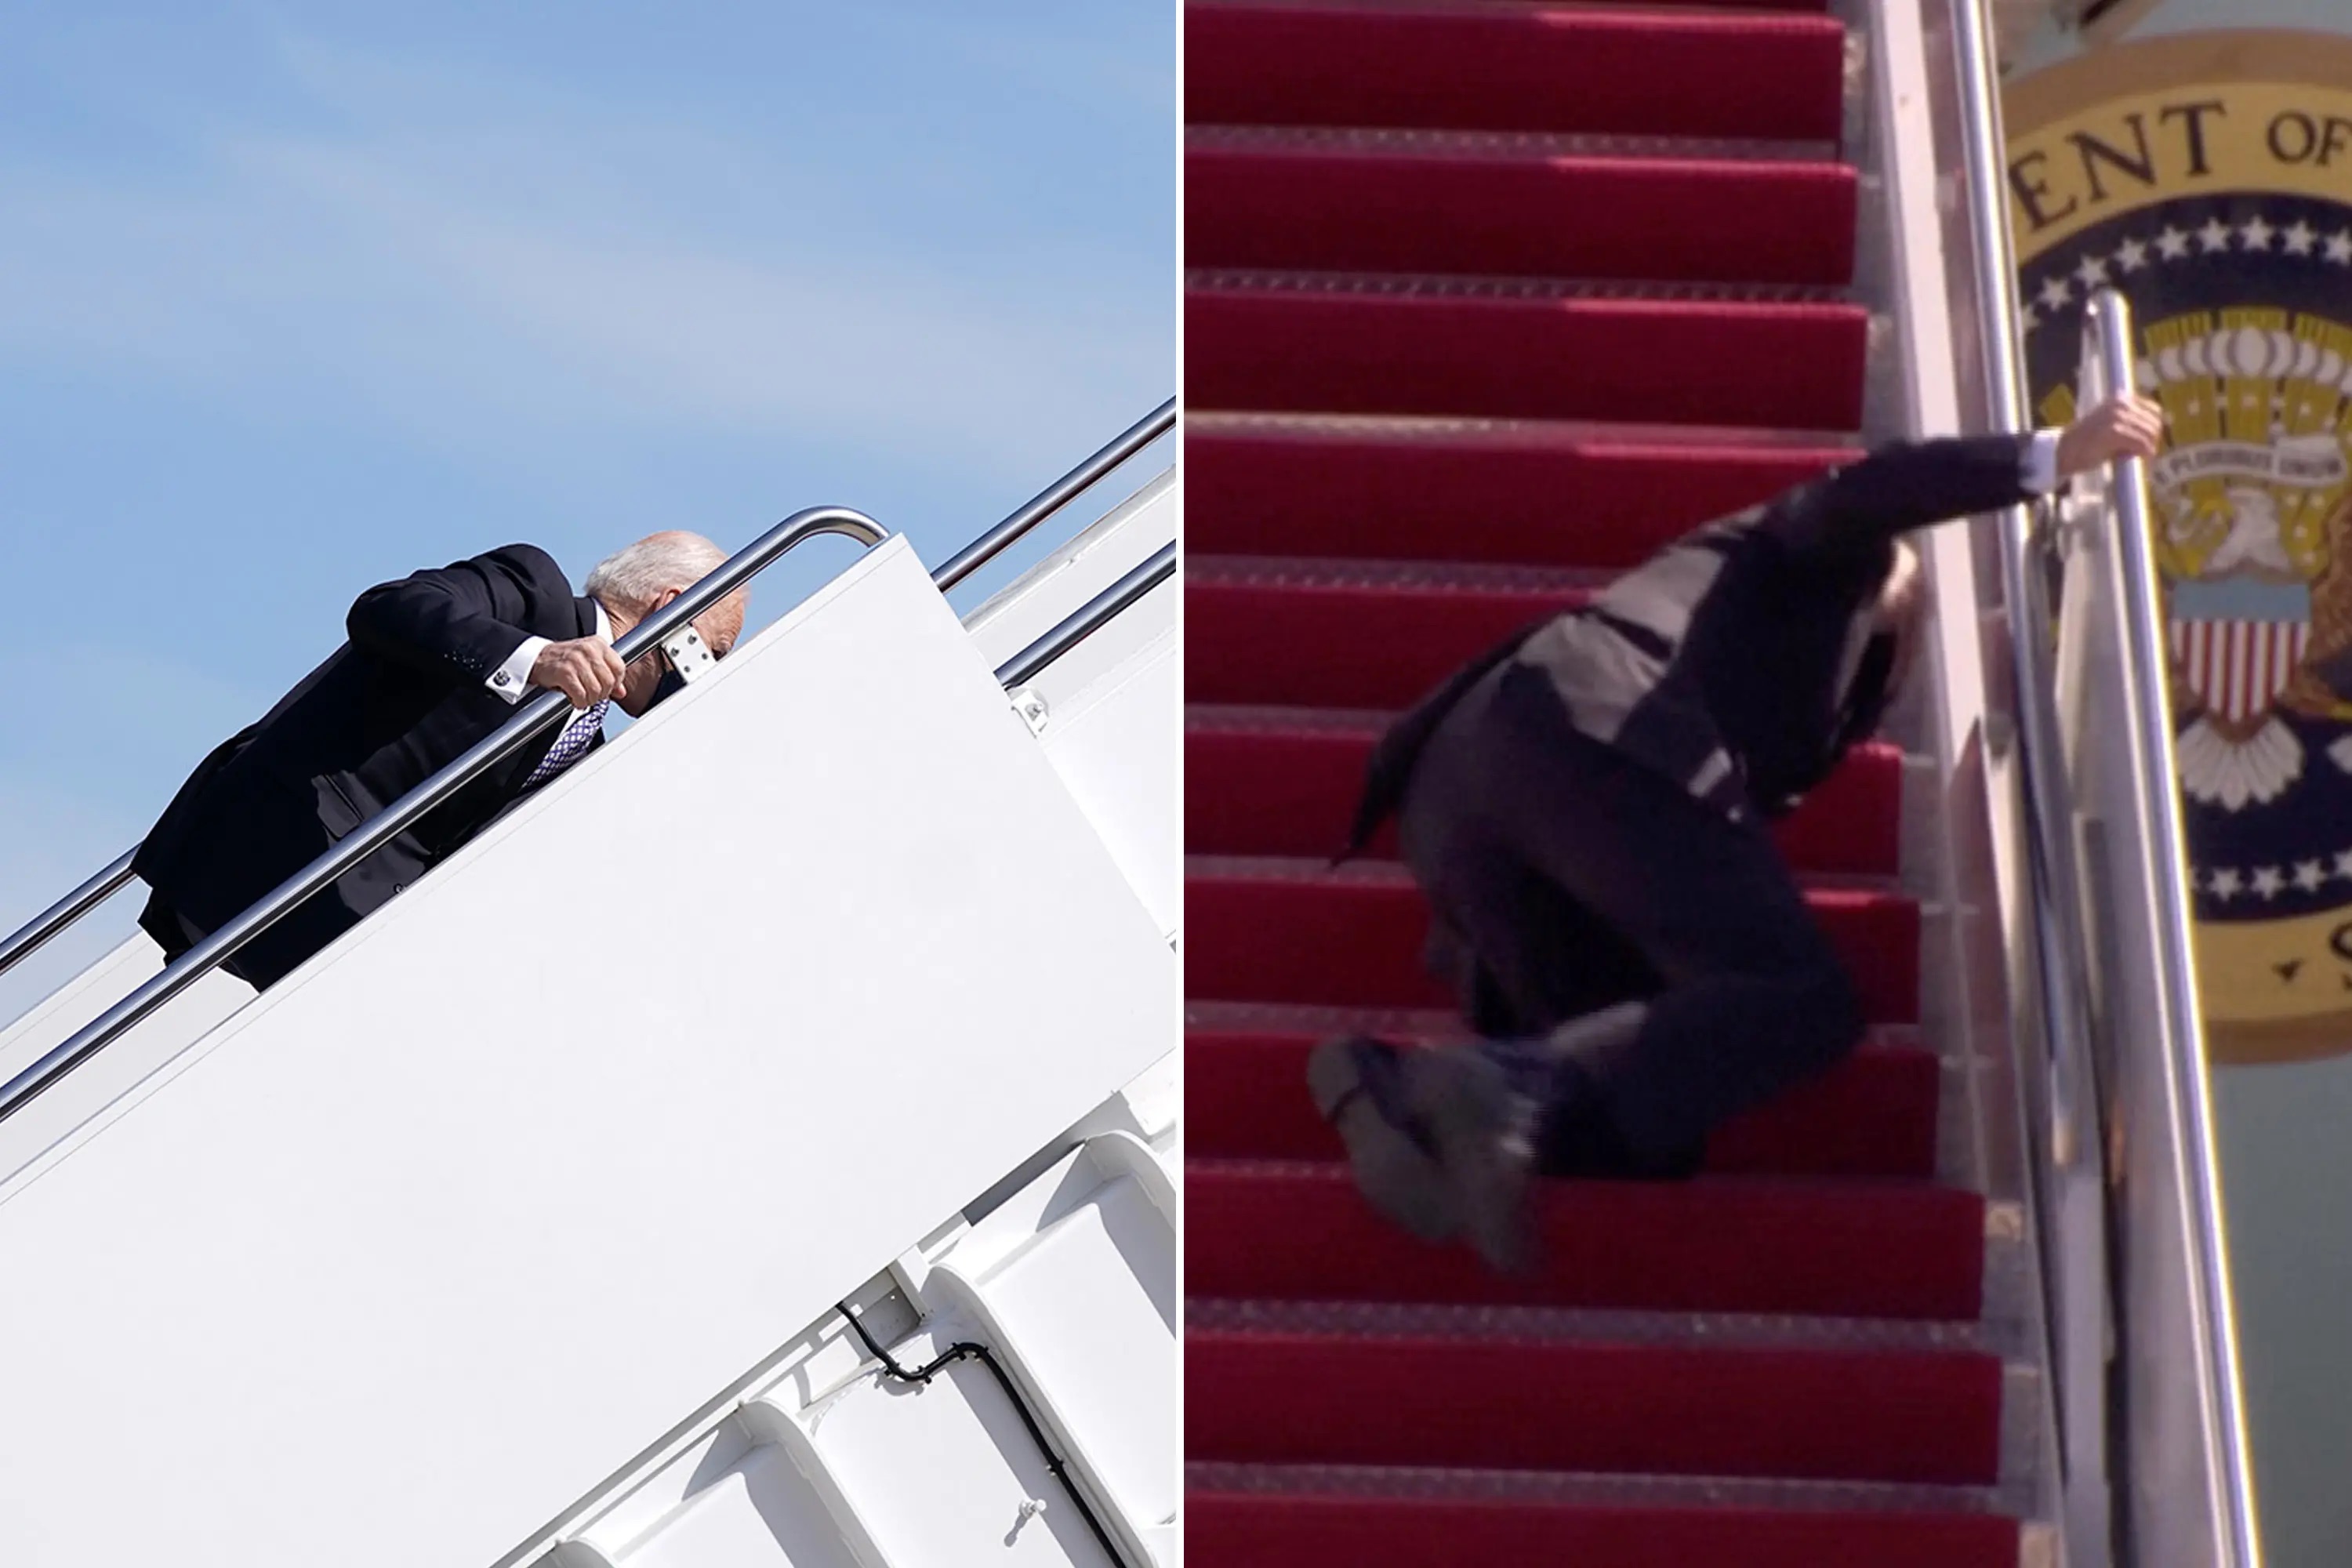 Biden stumbles and falls while walking up steps of Air Force One.